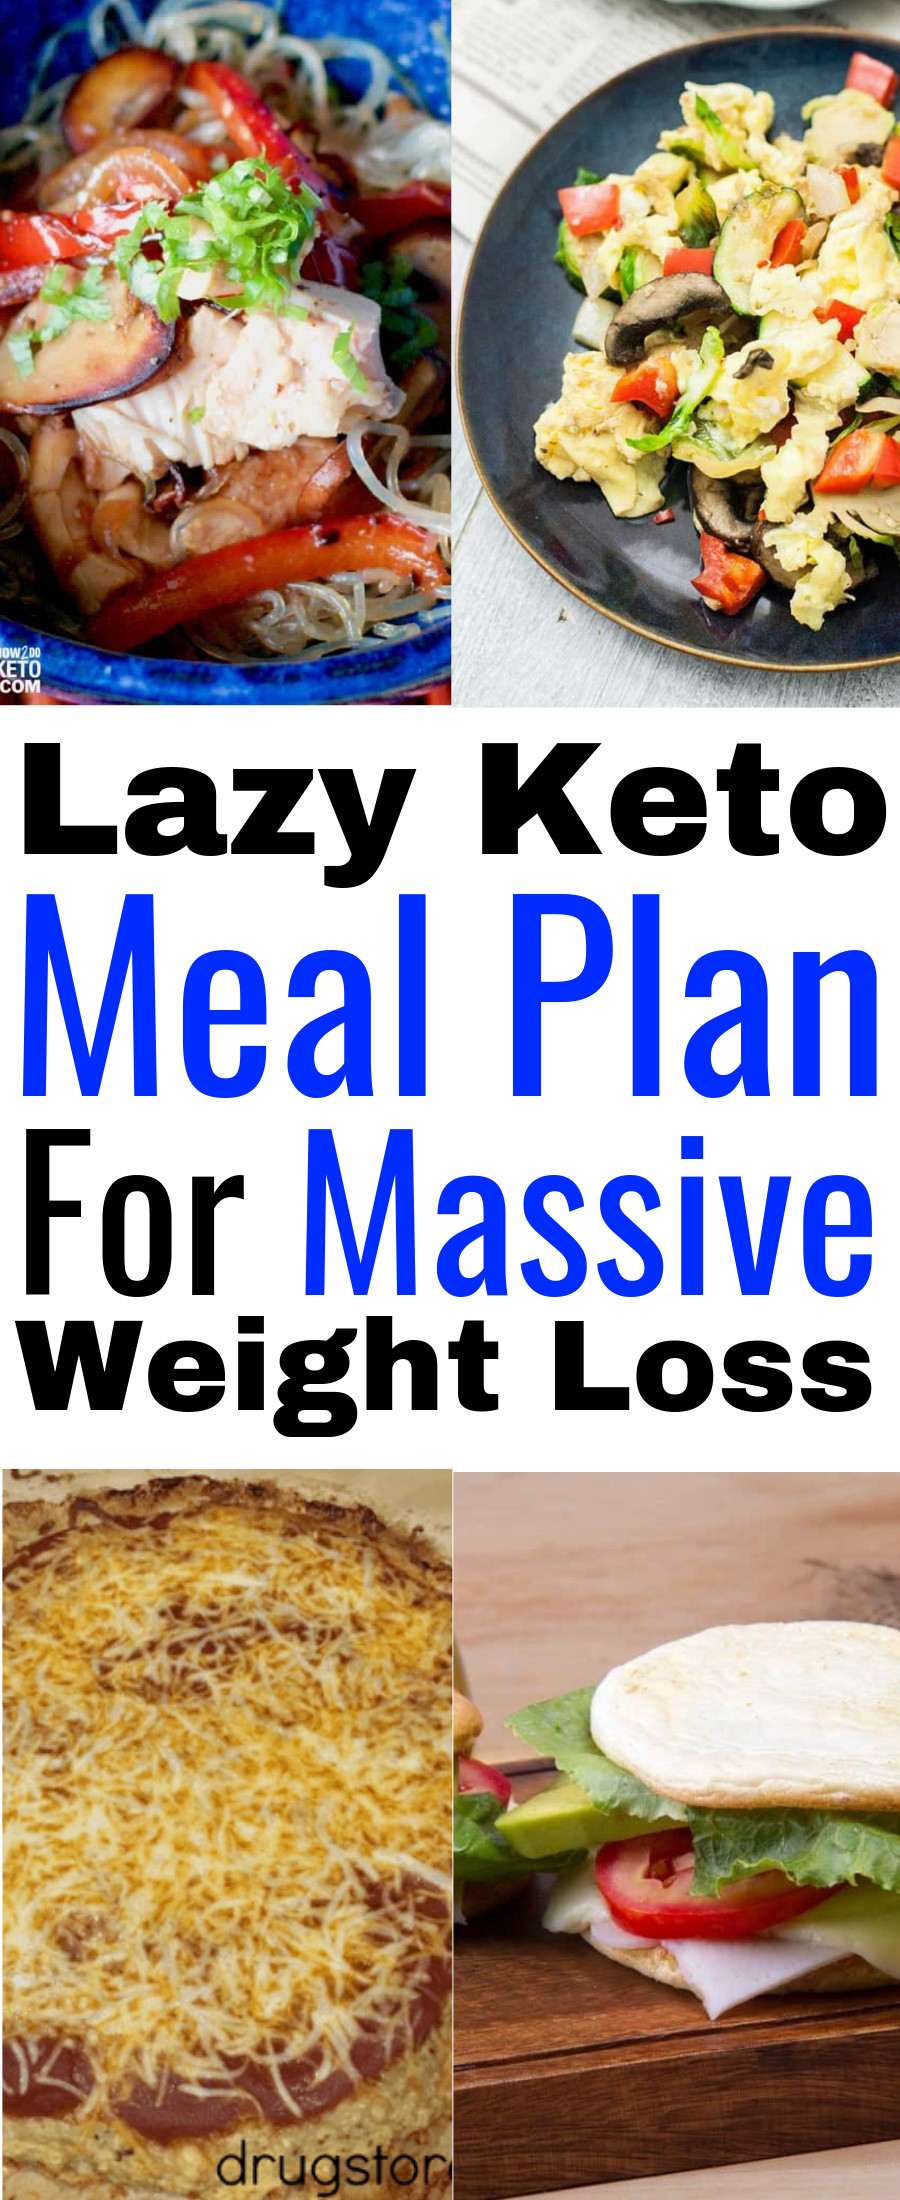 Lazy Keto Diet Plan
 Lazy Keto Meal Plan 30 Day Keto Meal Plan With Recipes